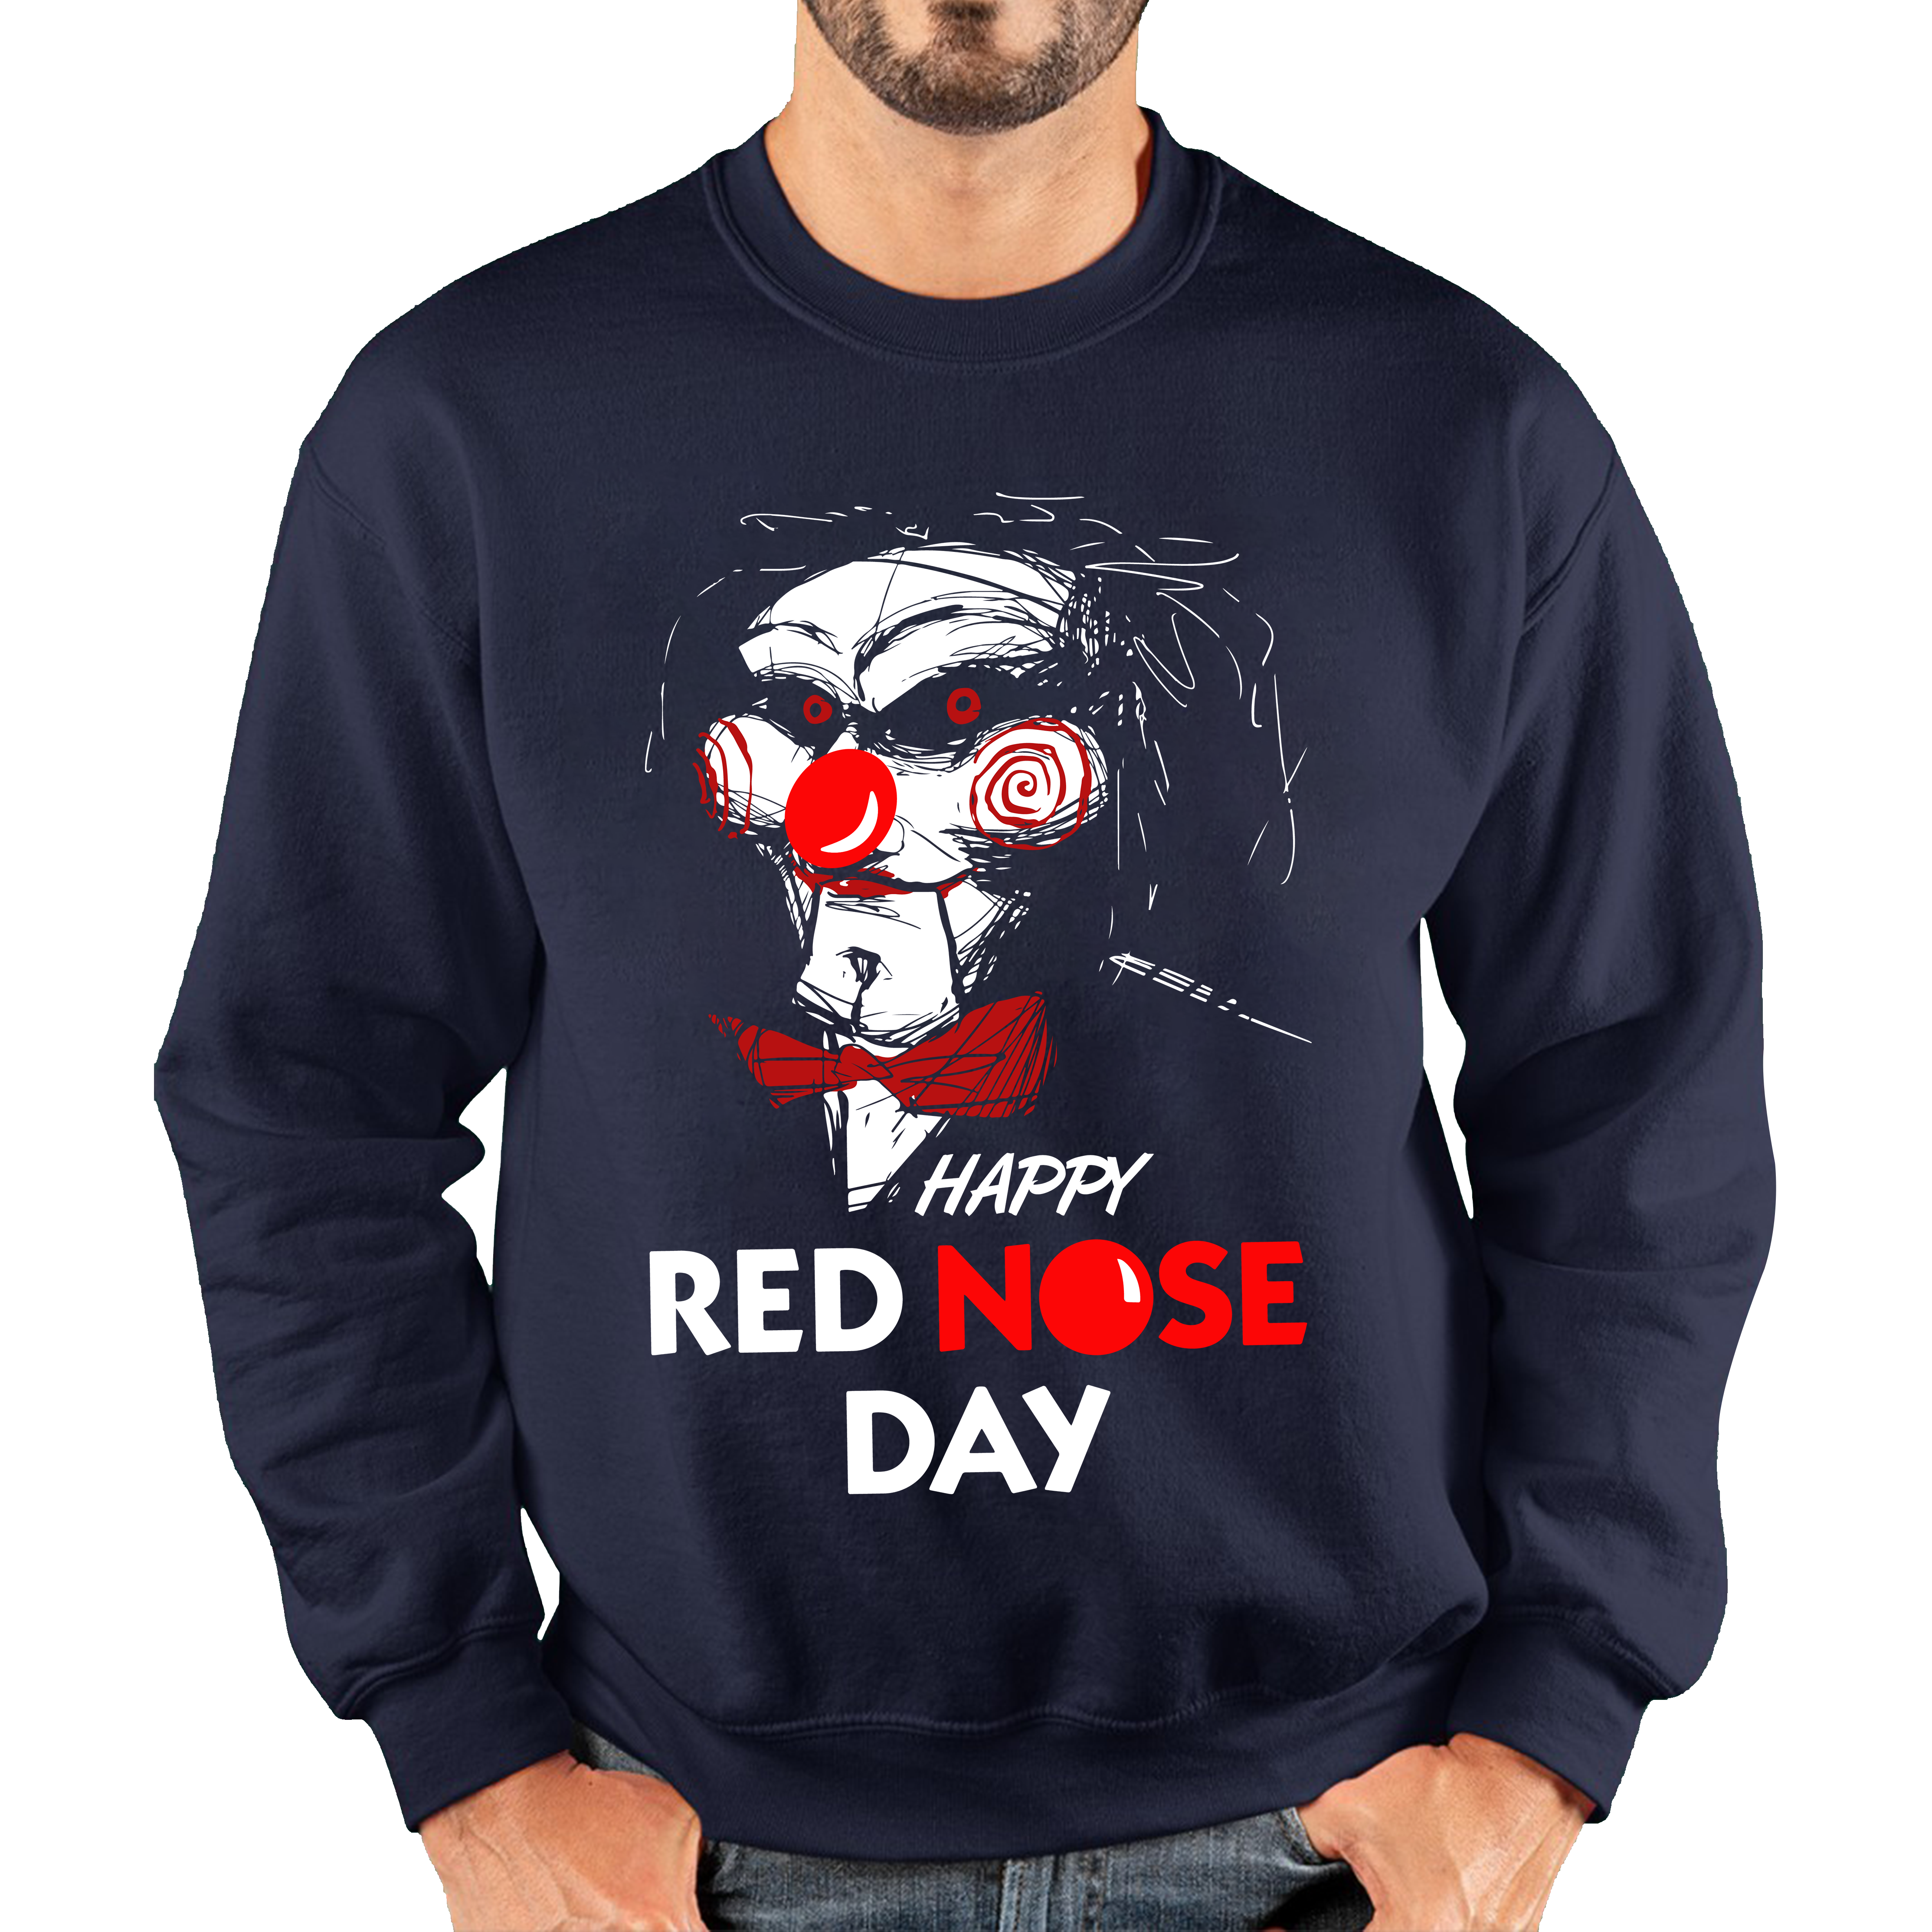 Jigsaw Happy Red Nose Day Adult Sweatshirt. 50% Goes To Charity